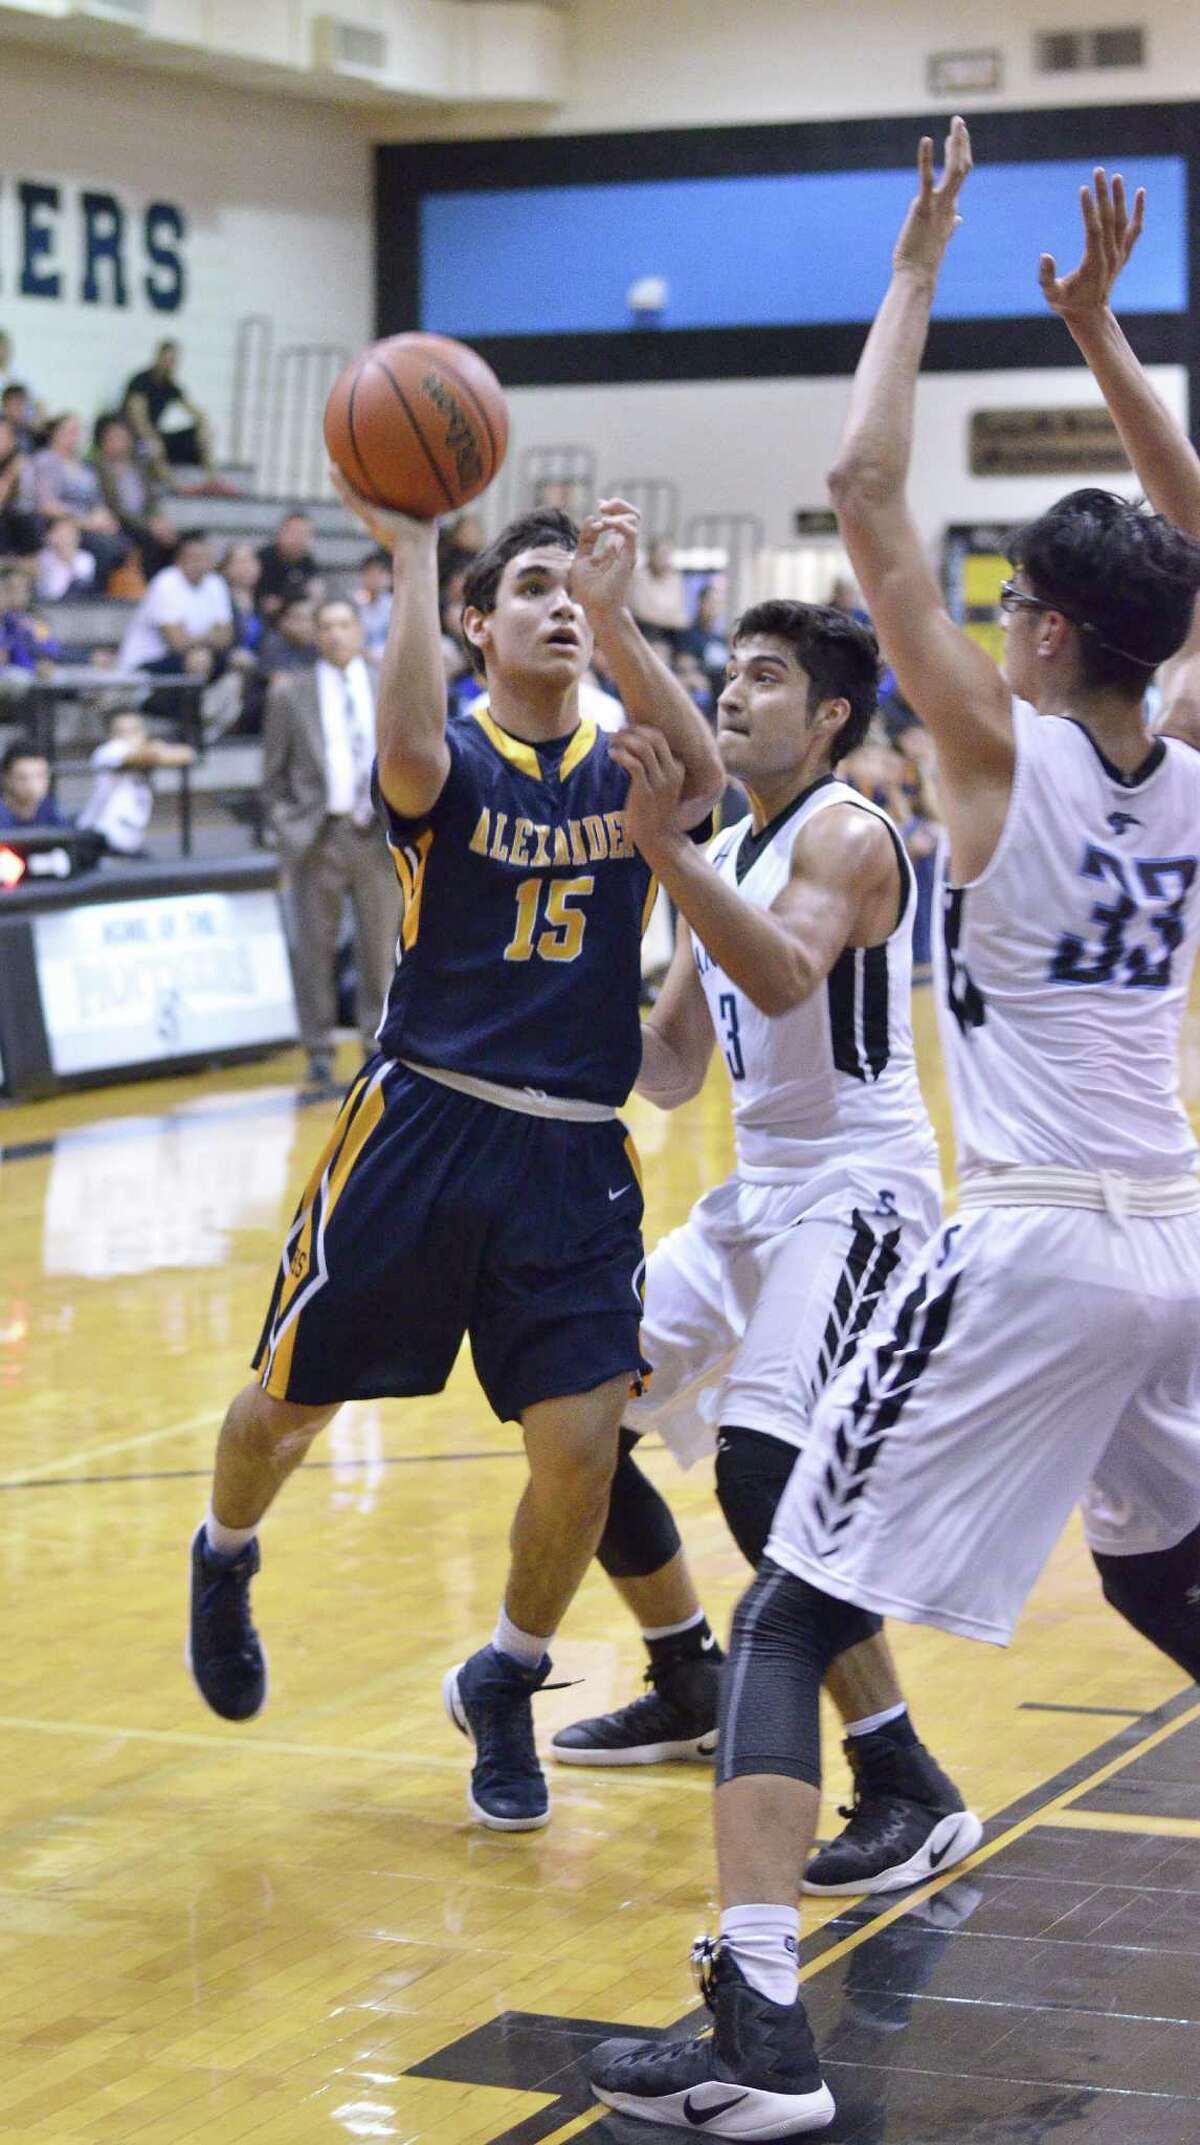 Alexander hosts United South at 7 p.m Tuesday. The Bulldogs rallied for a 69-67 overtime victory in the first round.